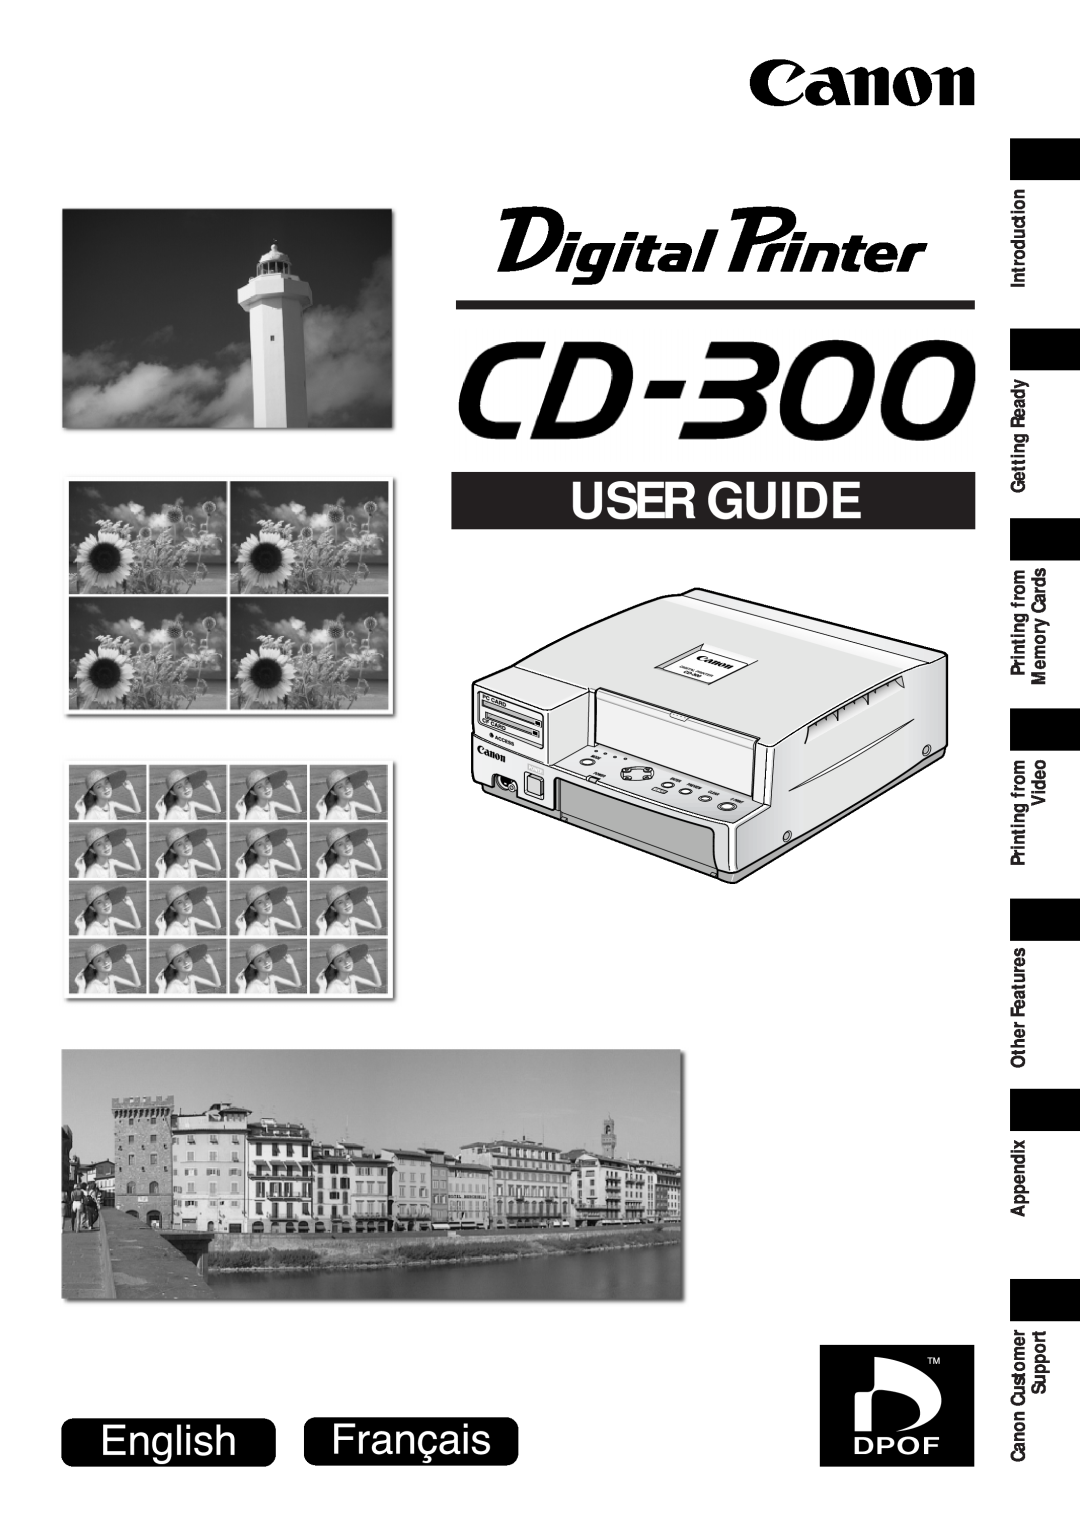 Canon CD-300 manual User Guide, Appendix, Other Features, Printing from, Getting Ready, Support, Video, Canon Customer 